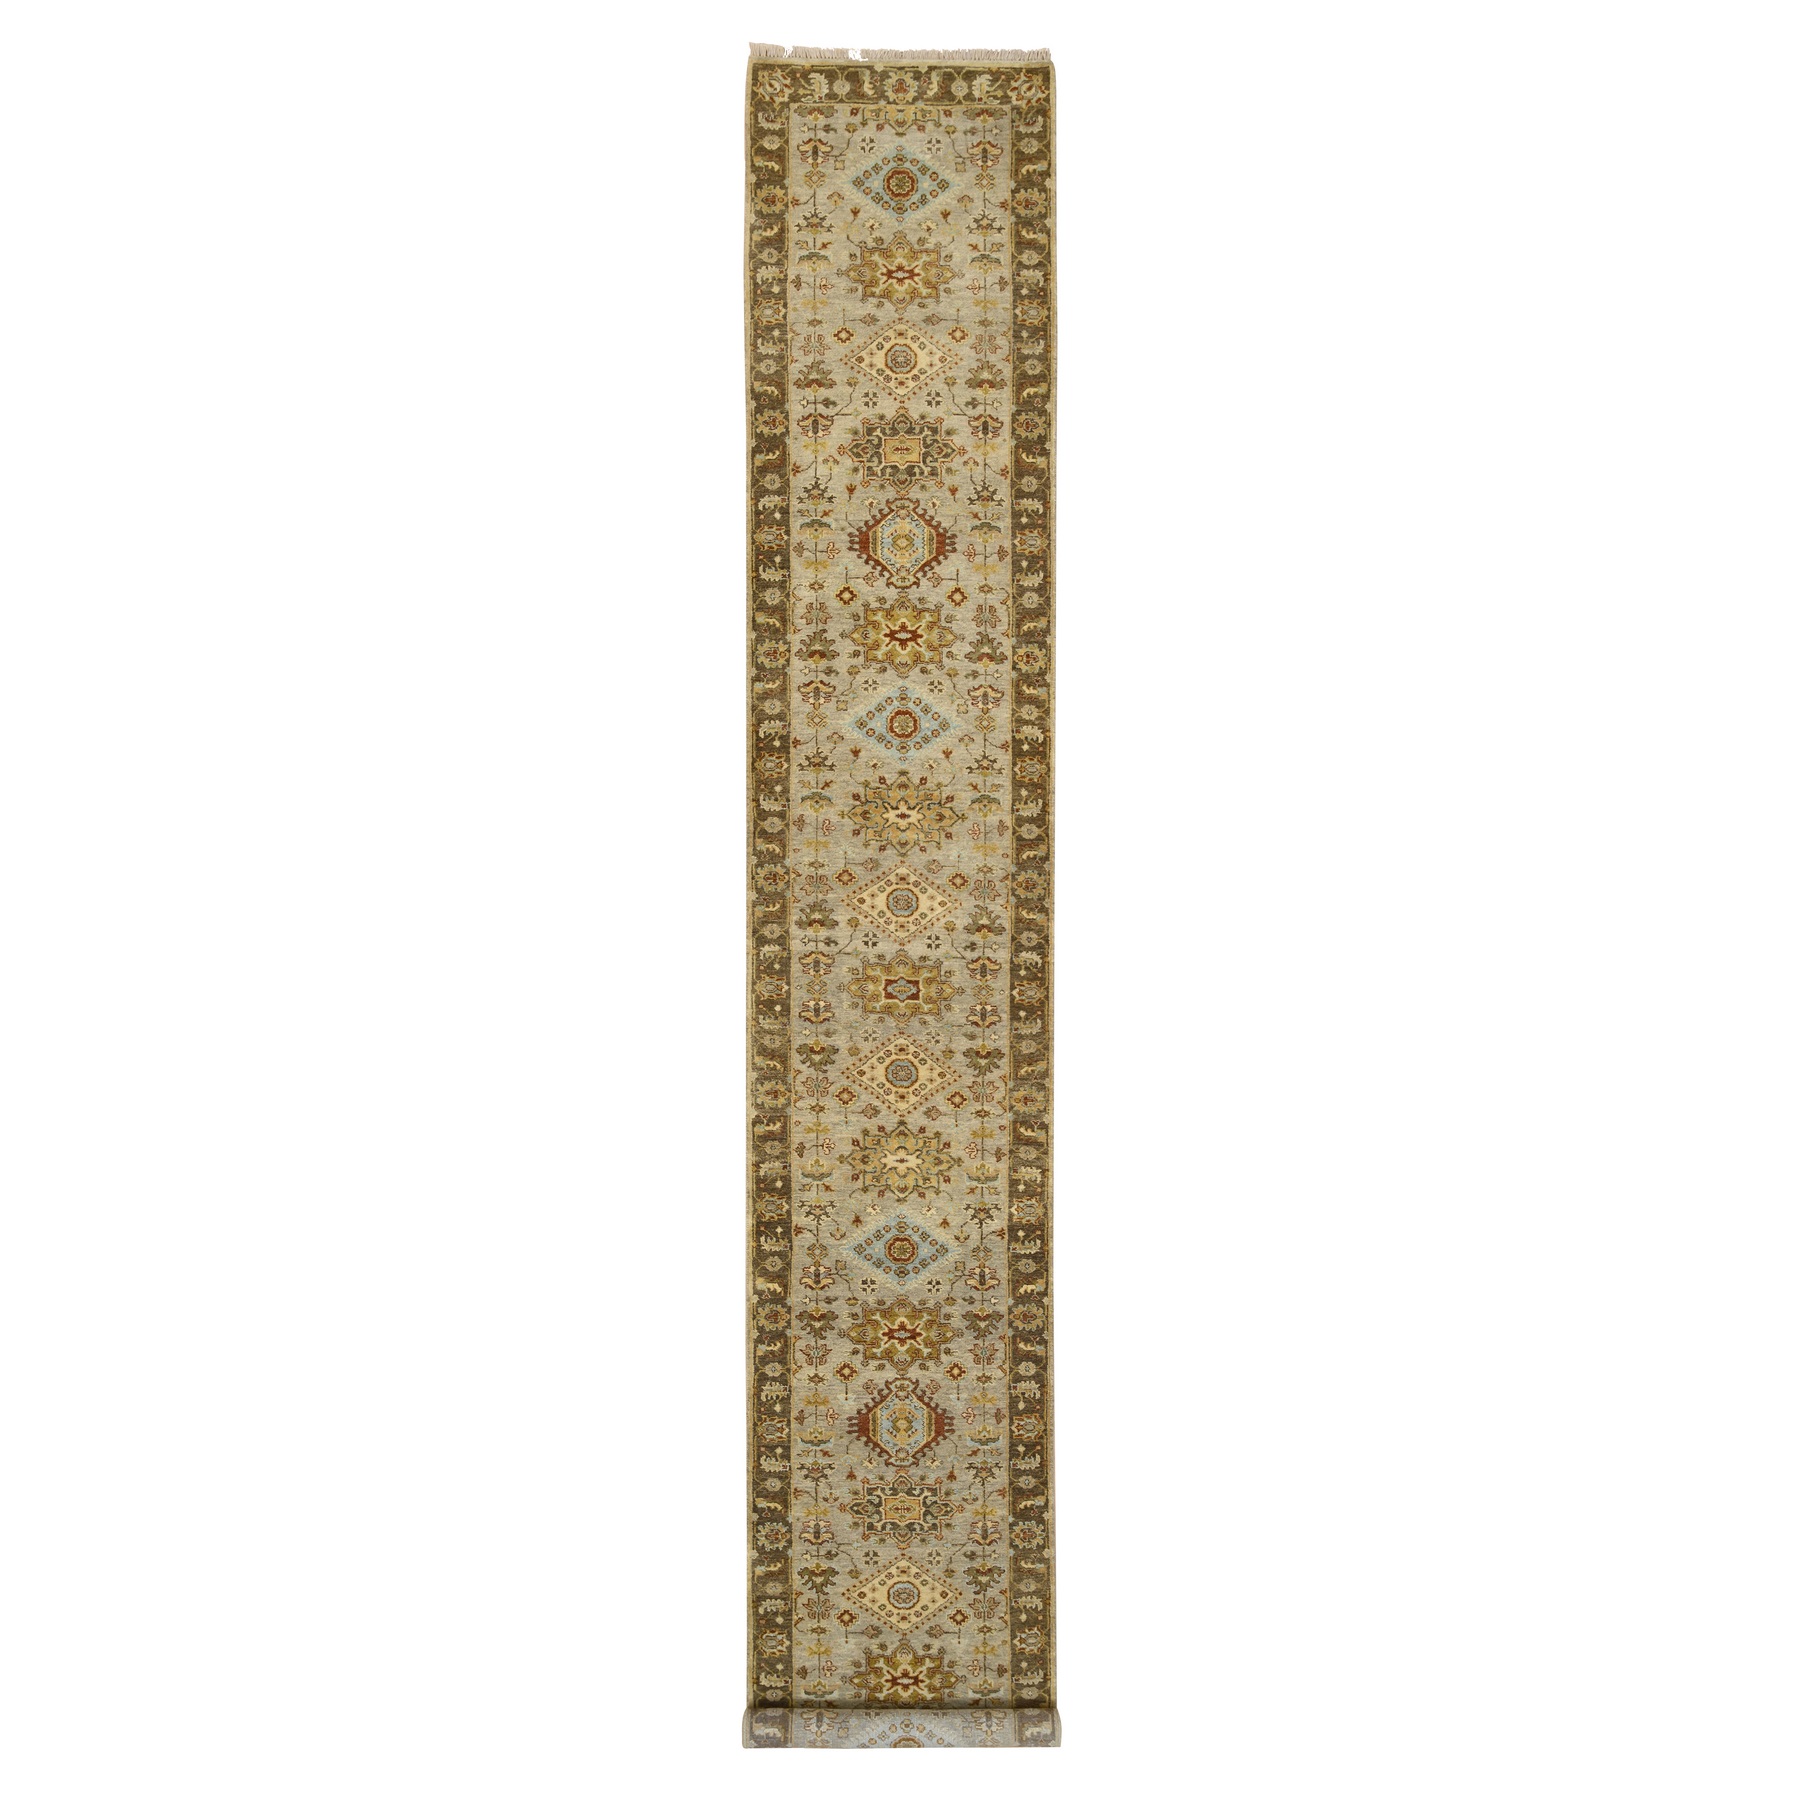 2'8"x16'1" Gray-Brown Karajeh Design with Tribal Medallions Hand Woven, Pure Wool Runner Oriental Rug 